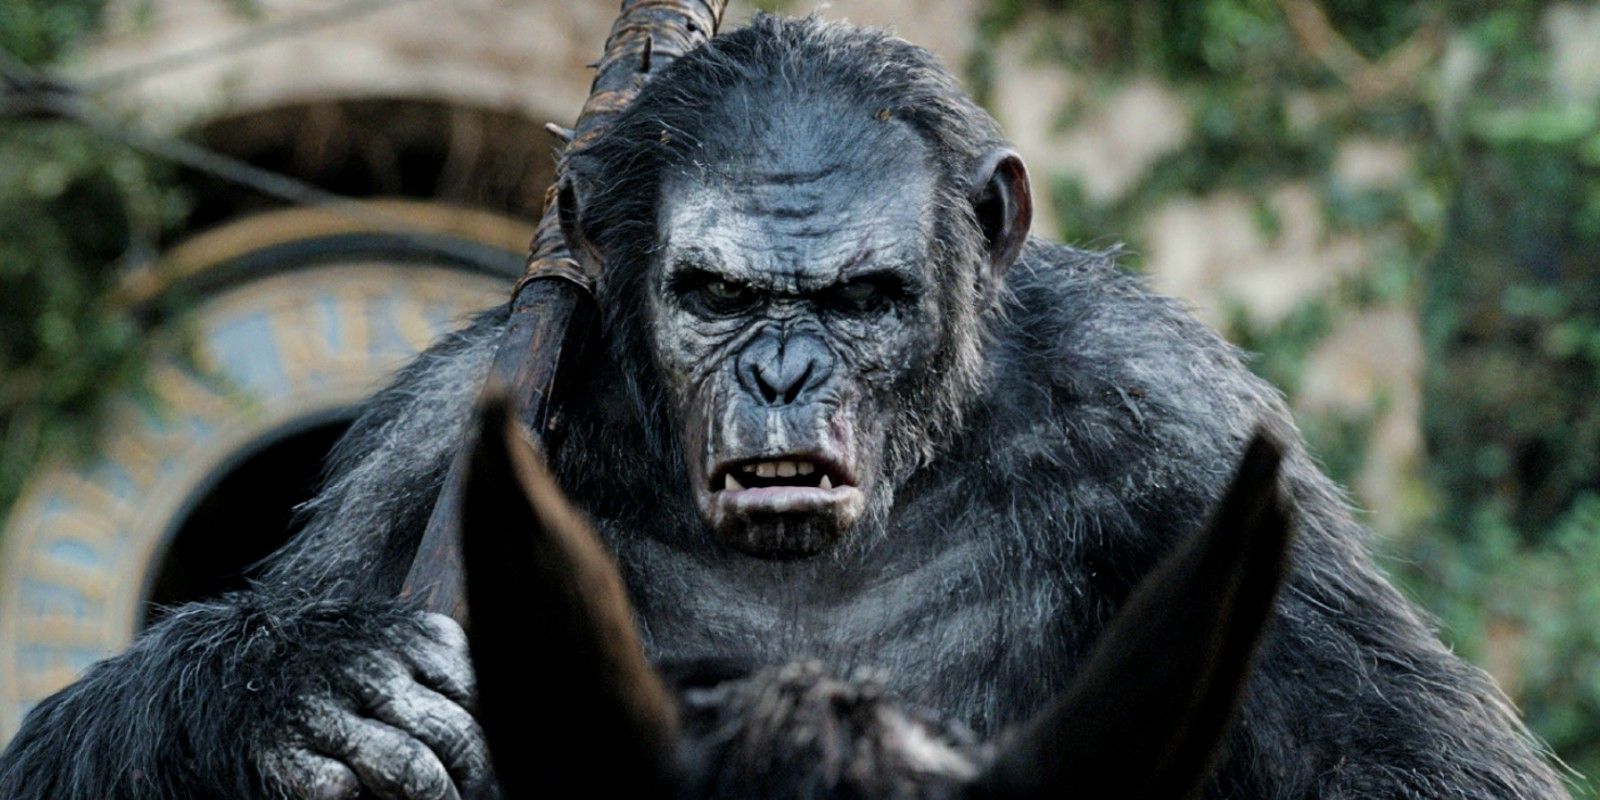 Dawn of the Planet of the Apes - Koba